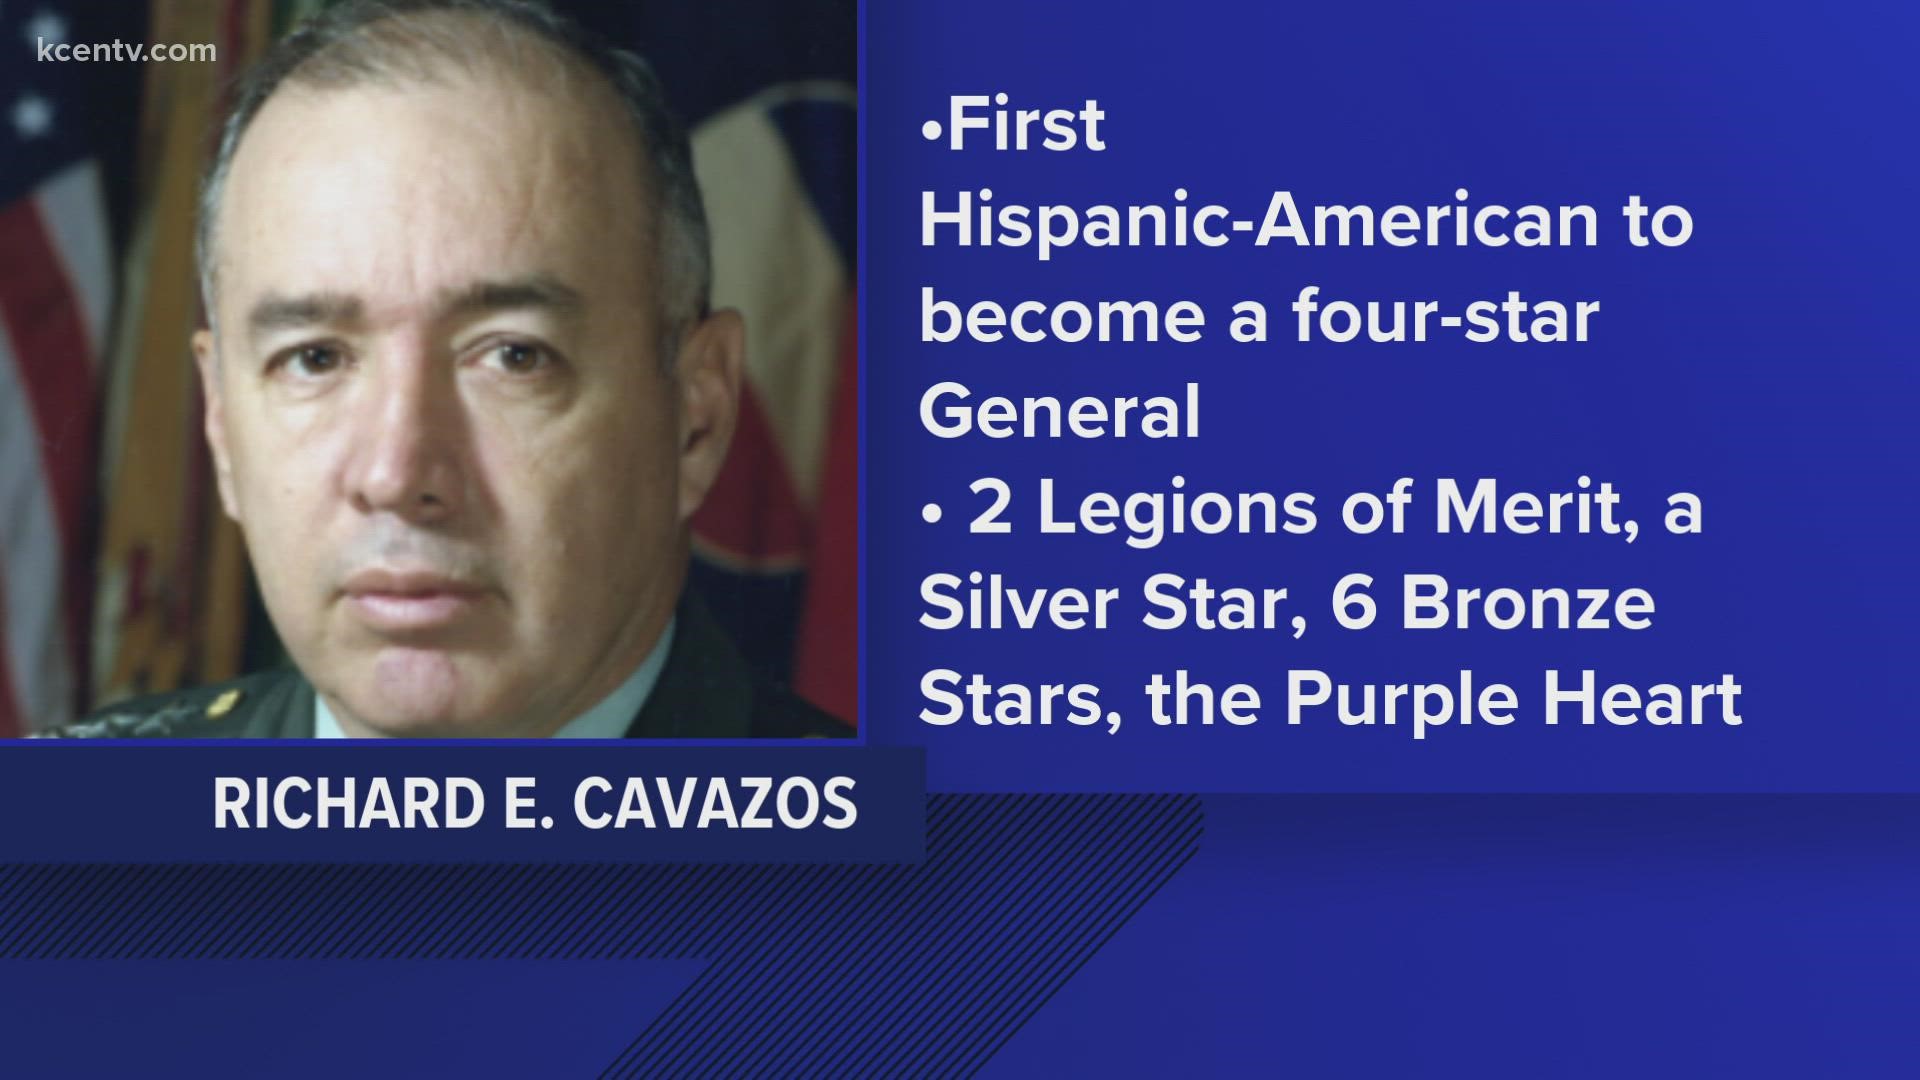 Currently, Fort Hood is named after a Confederate general. If approved, the post will be renamed after the first Latino to become a four-star general in the Army.